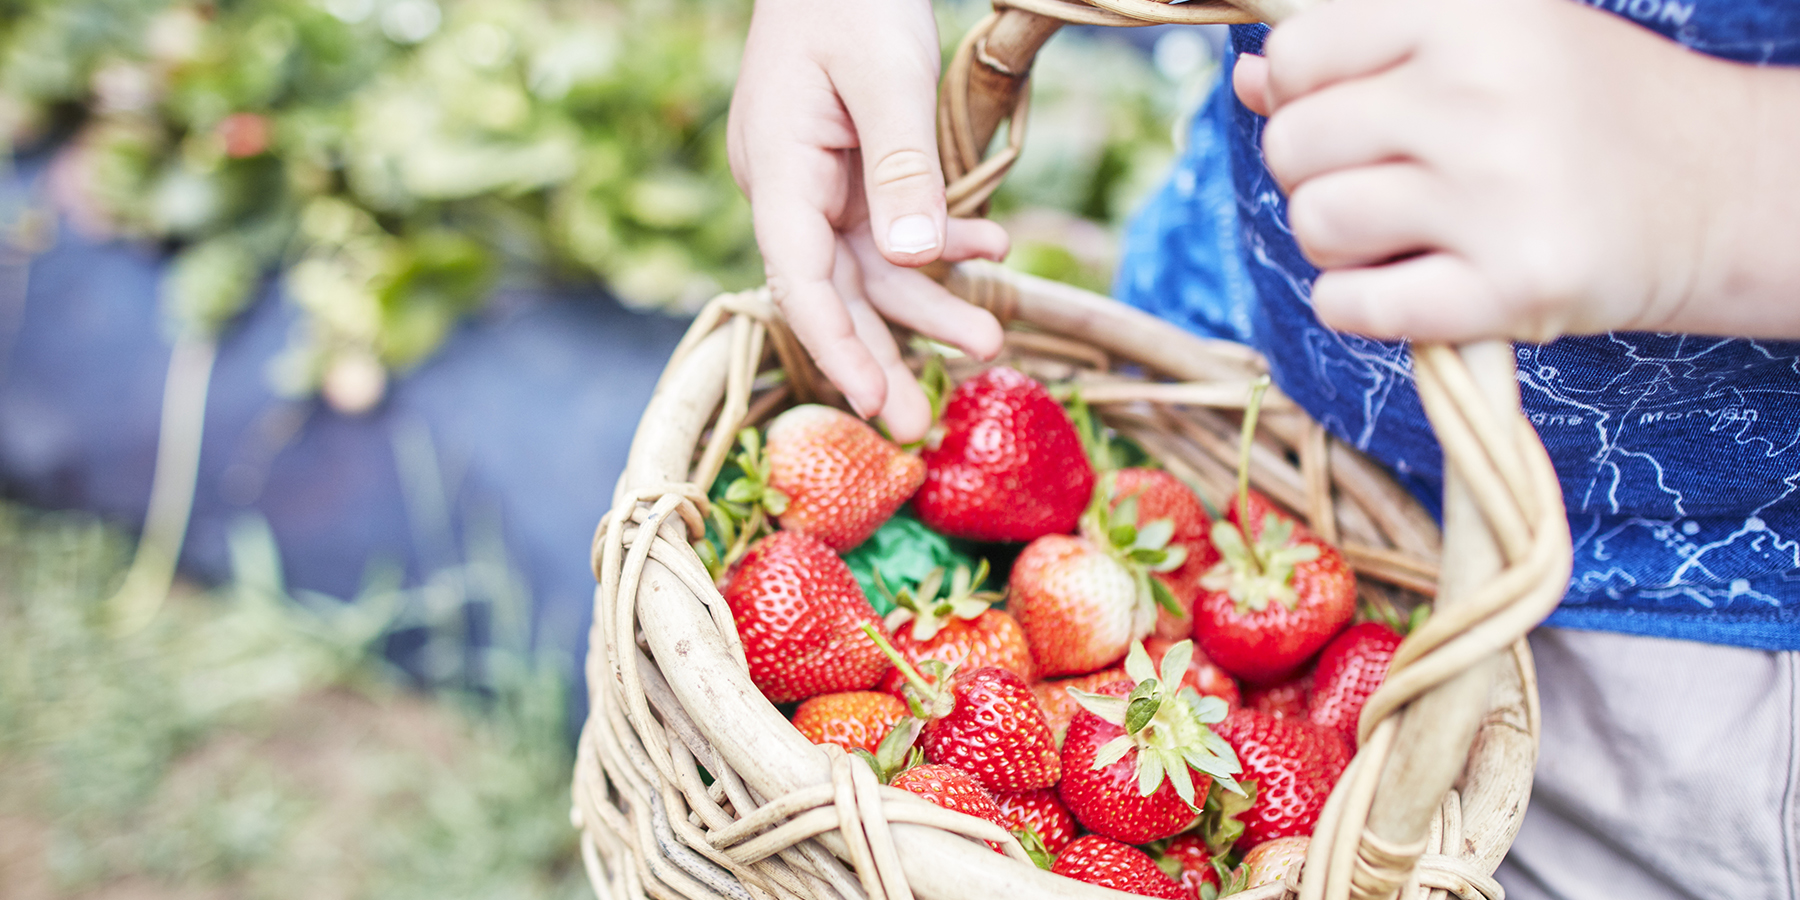 Buckle up for a day of family fun, Sunny Ridge Strawberry Farm